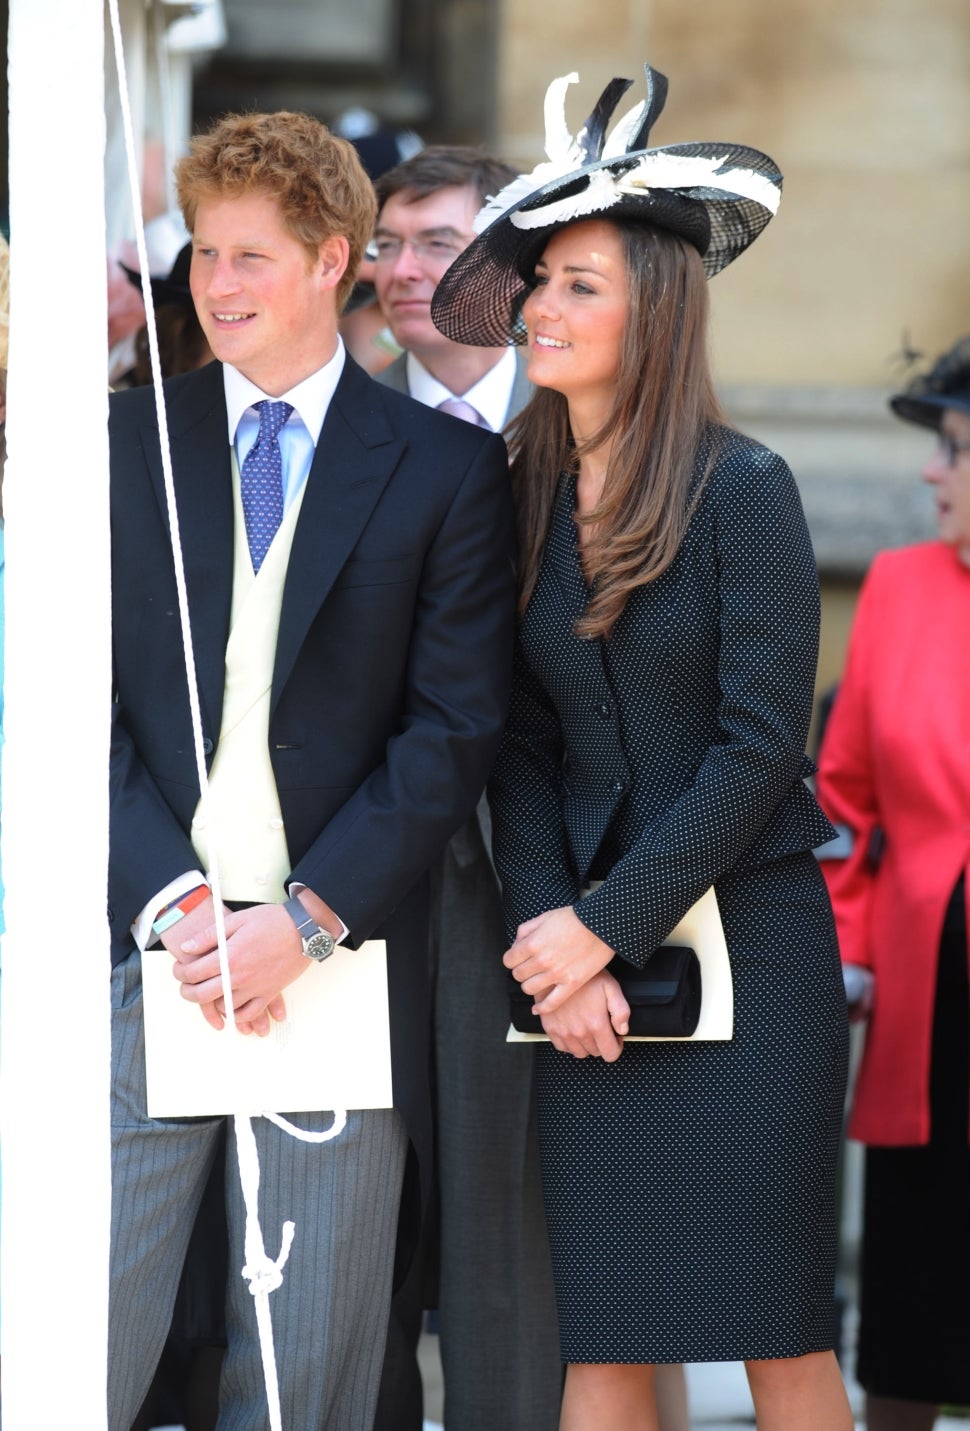 Prince Harry and Kate Middleton